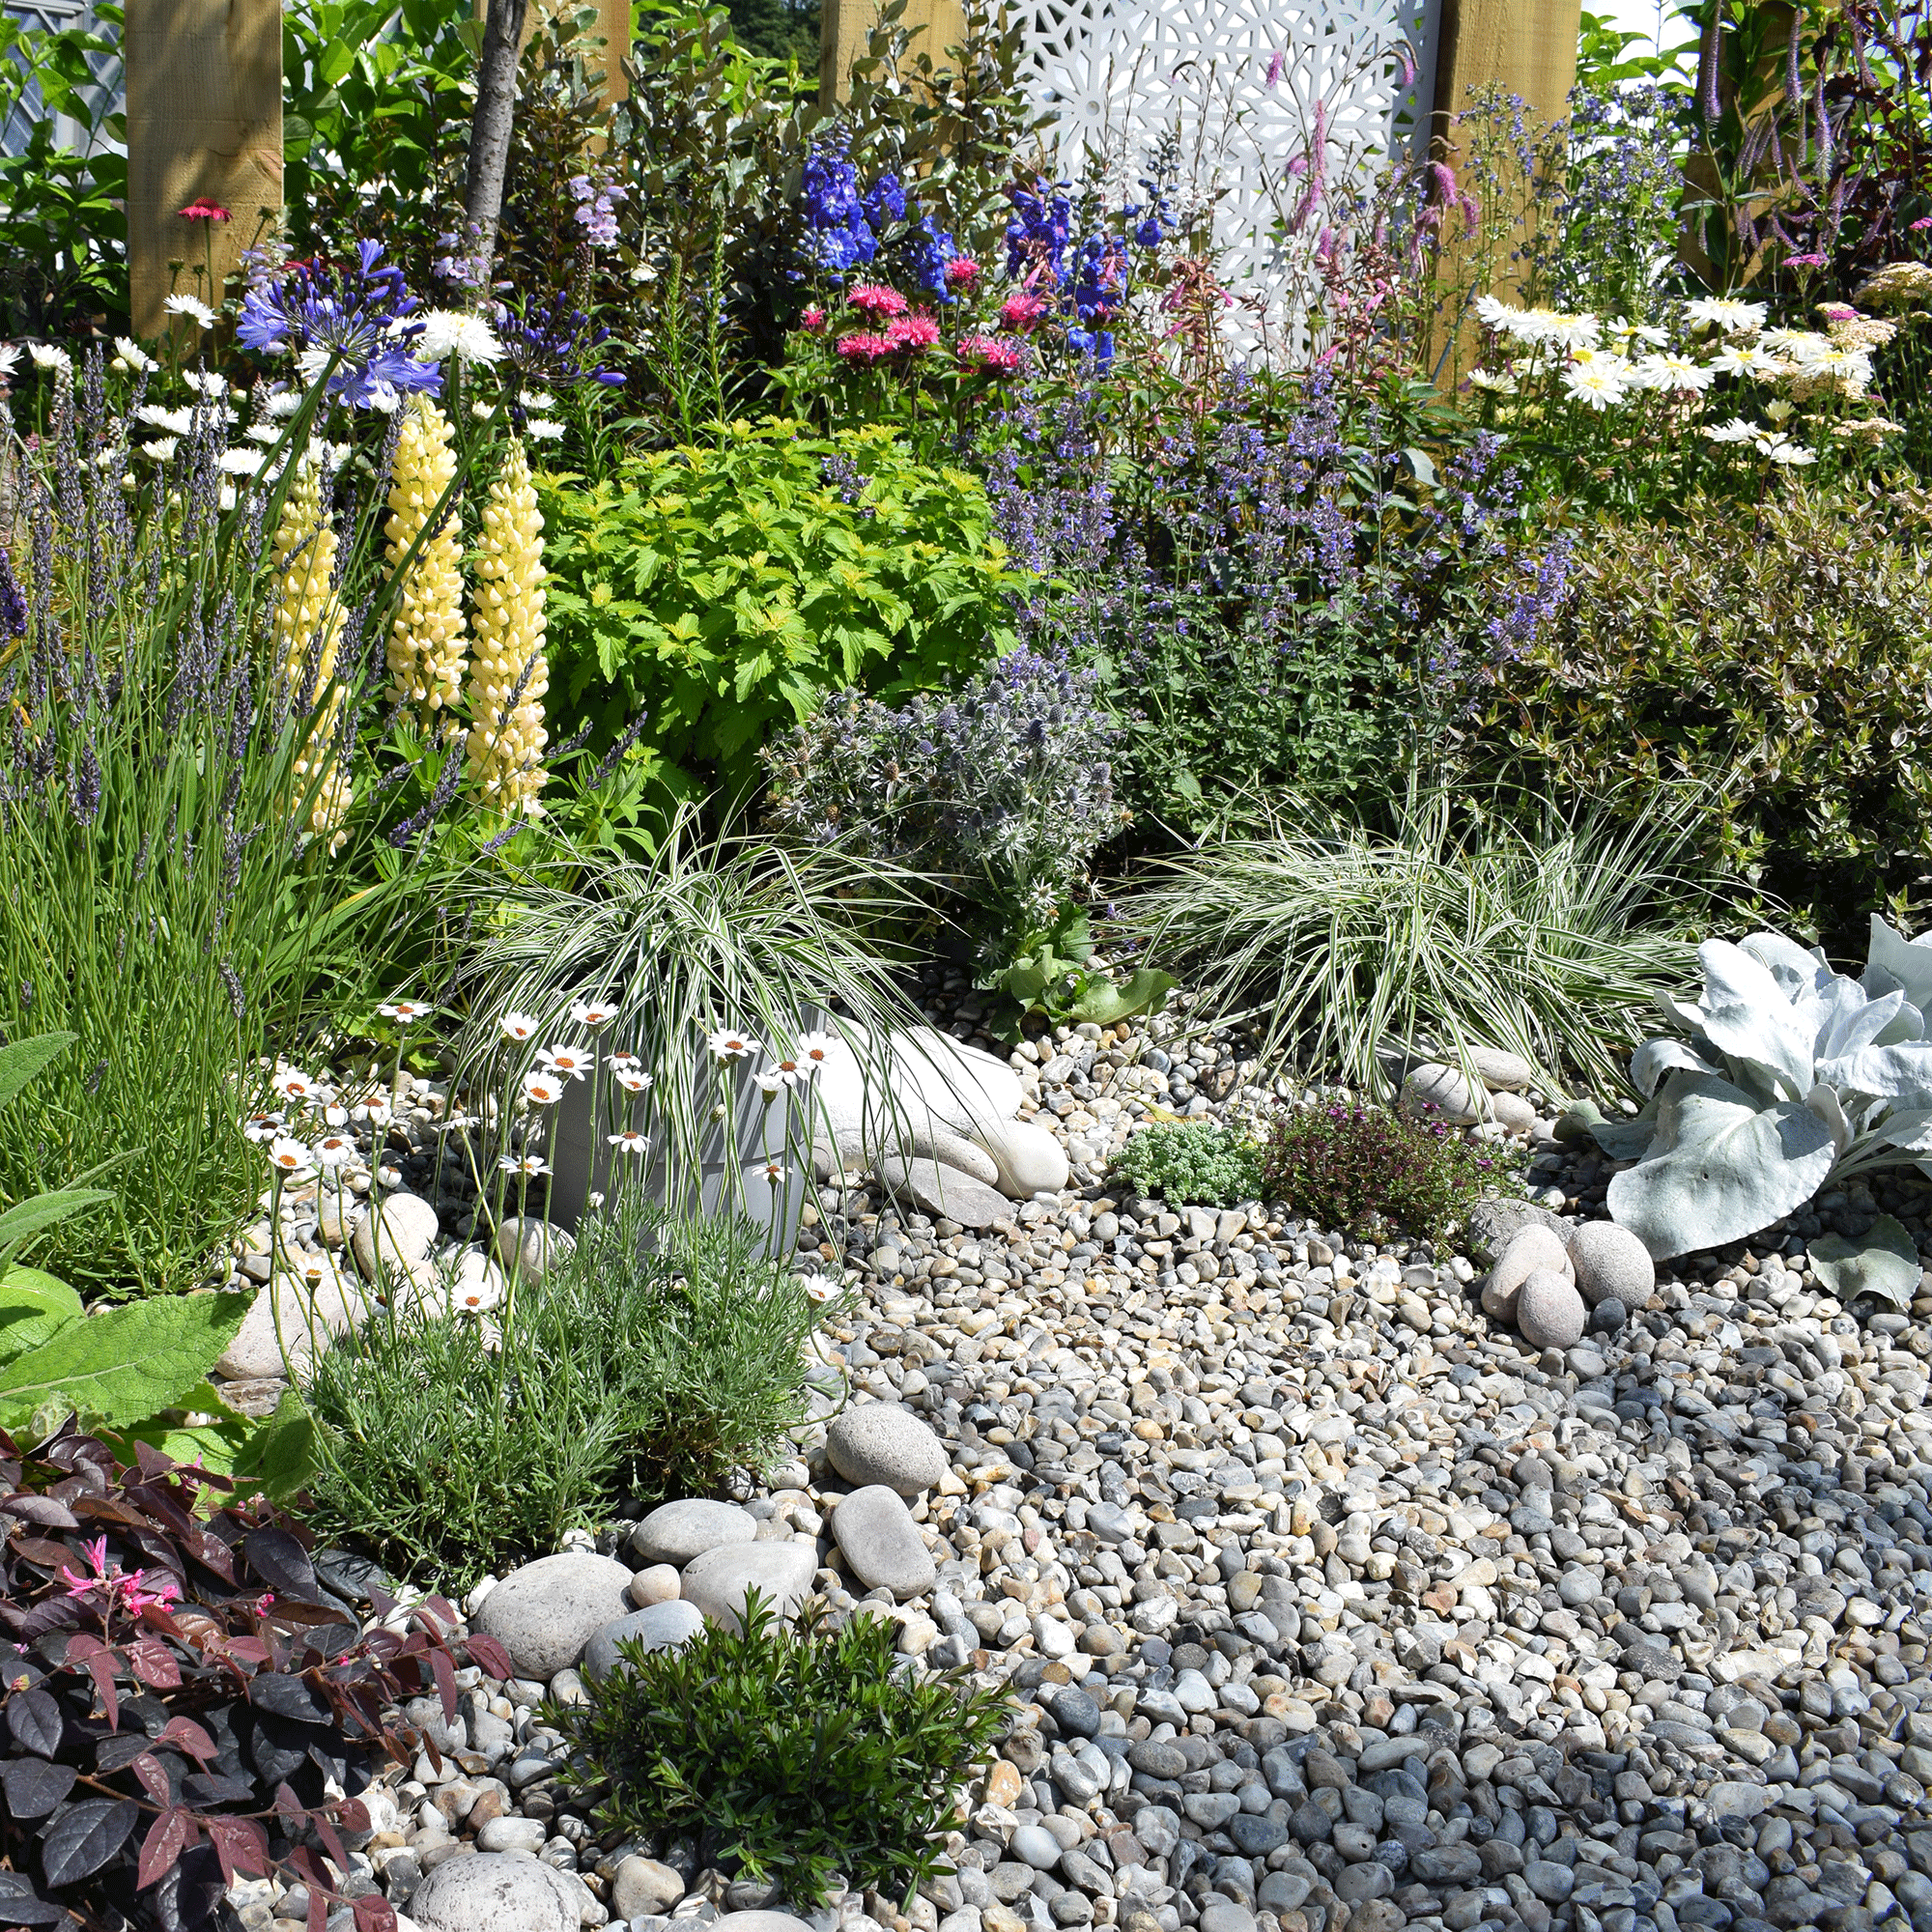 Drought Tolerant planting with gravel